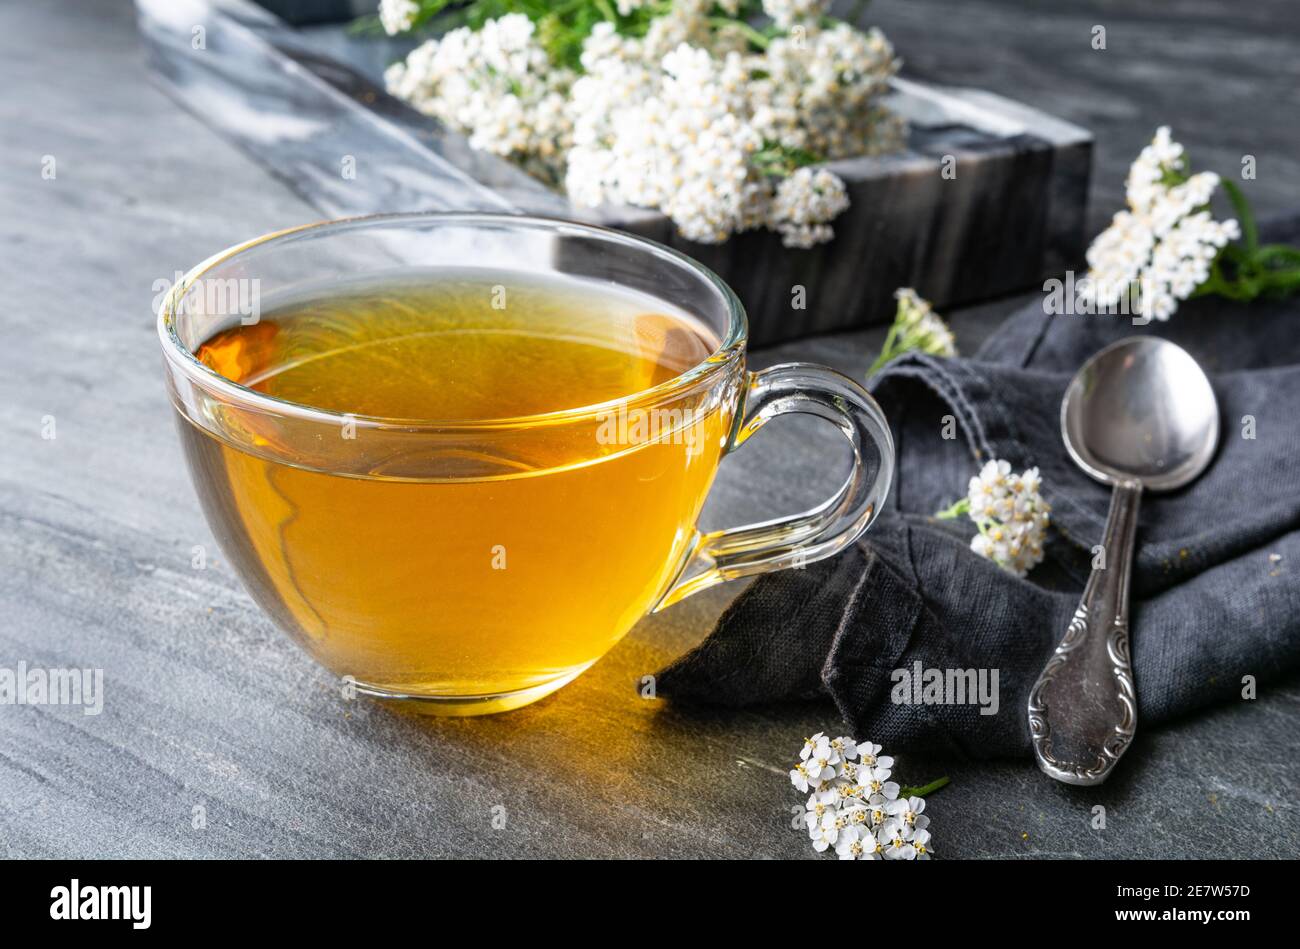 Medicinal herbal tea made from Yarrow, remedy for wound healing on rustic stone background Stock Photo